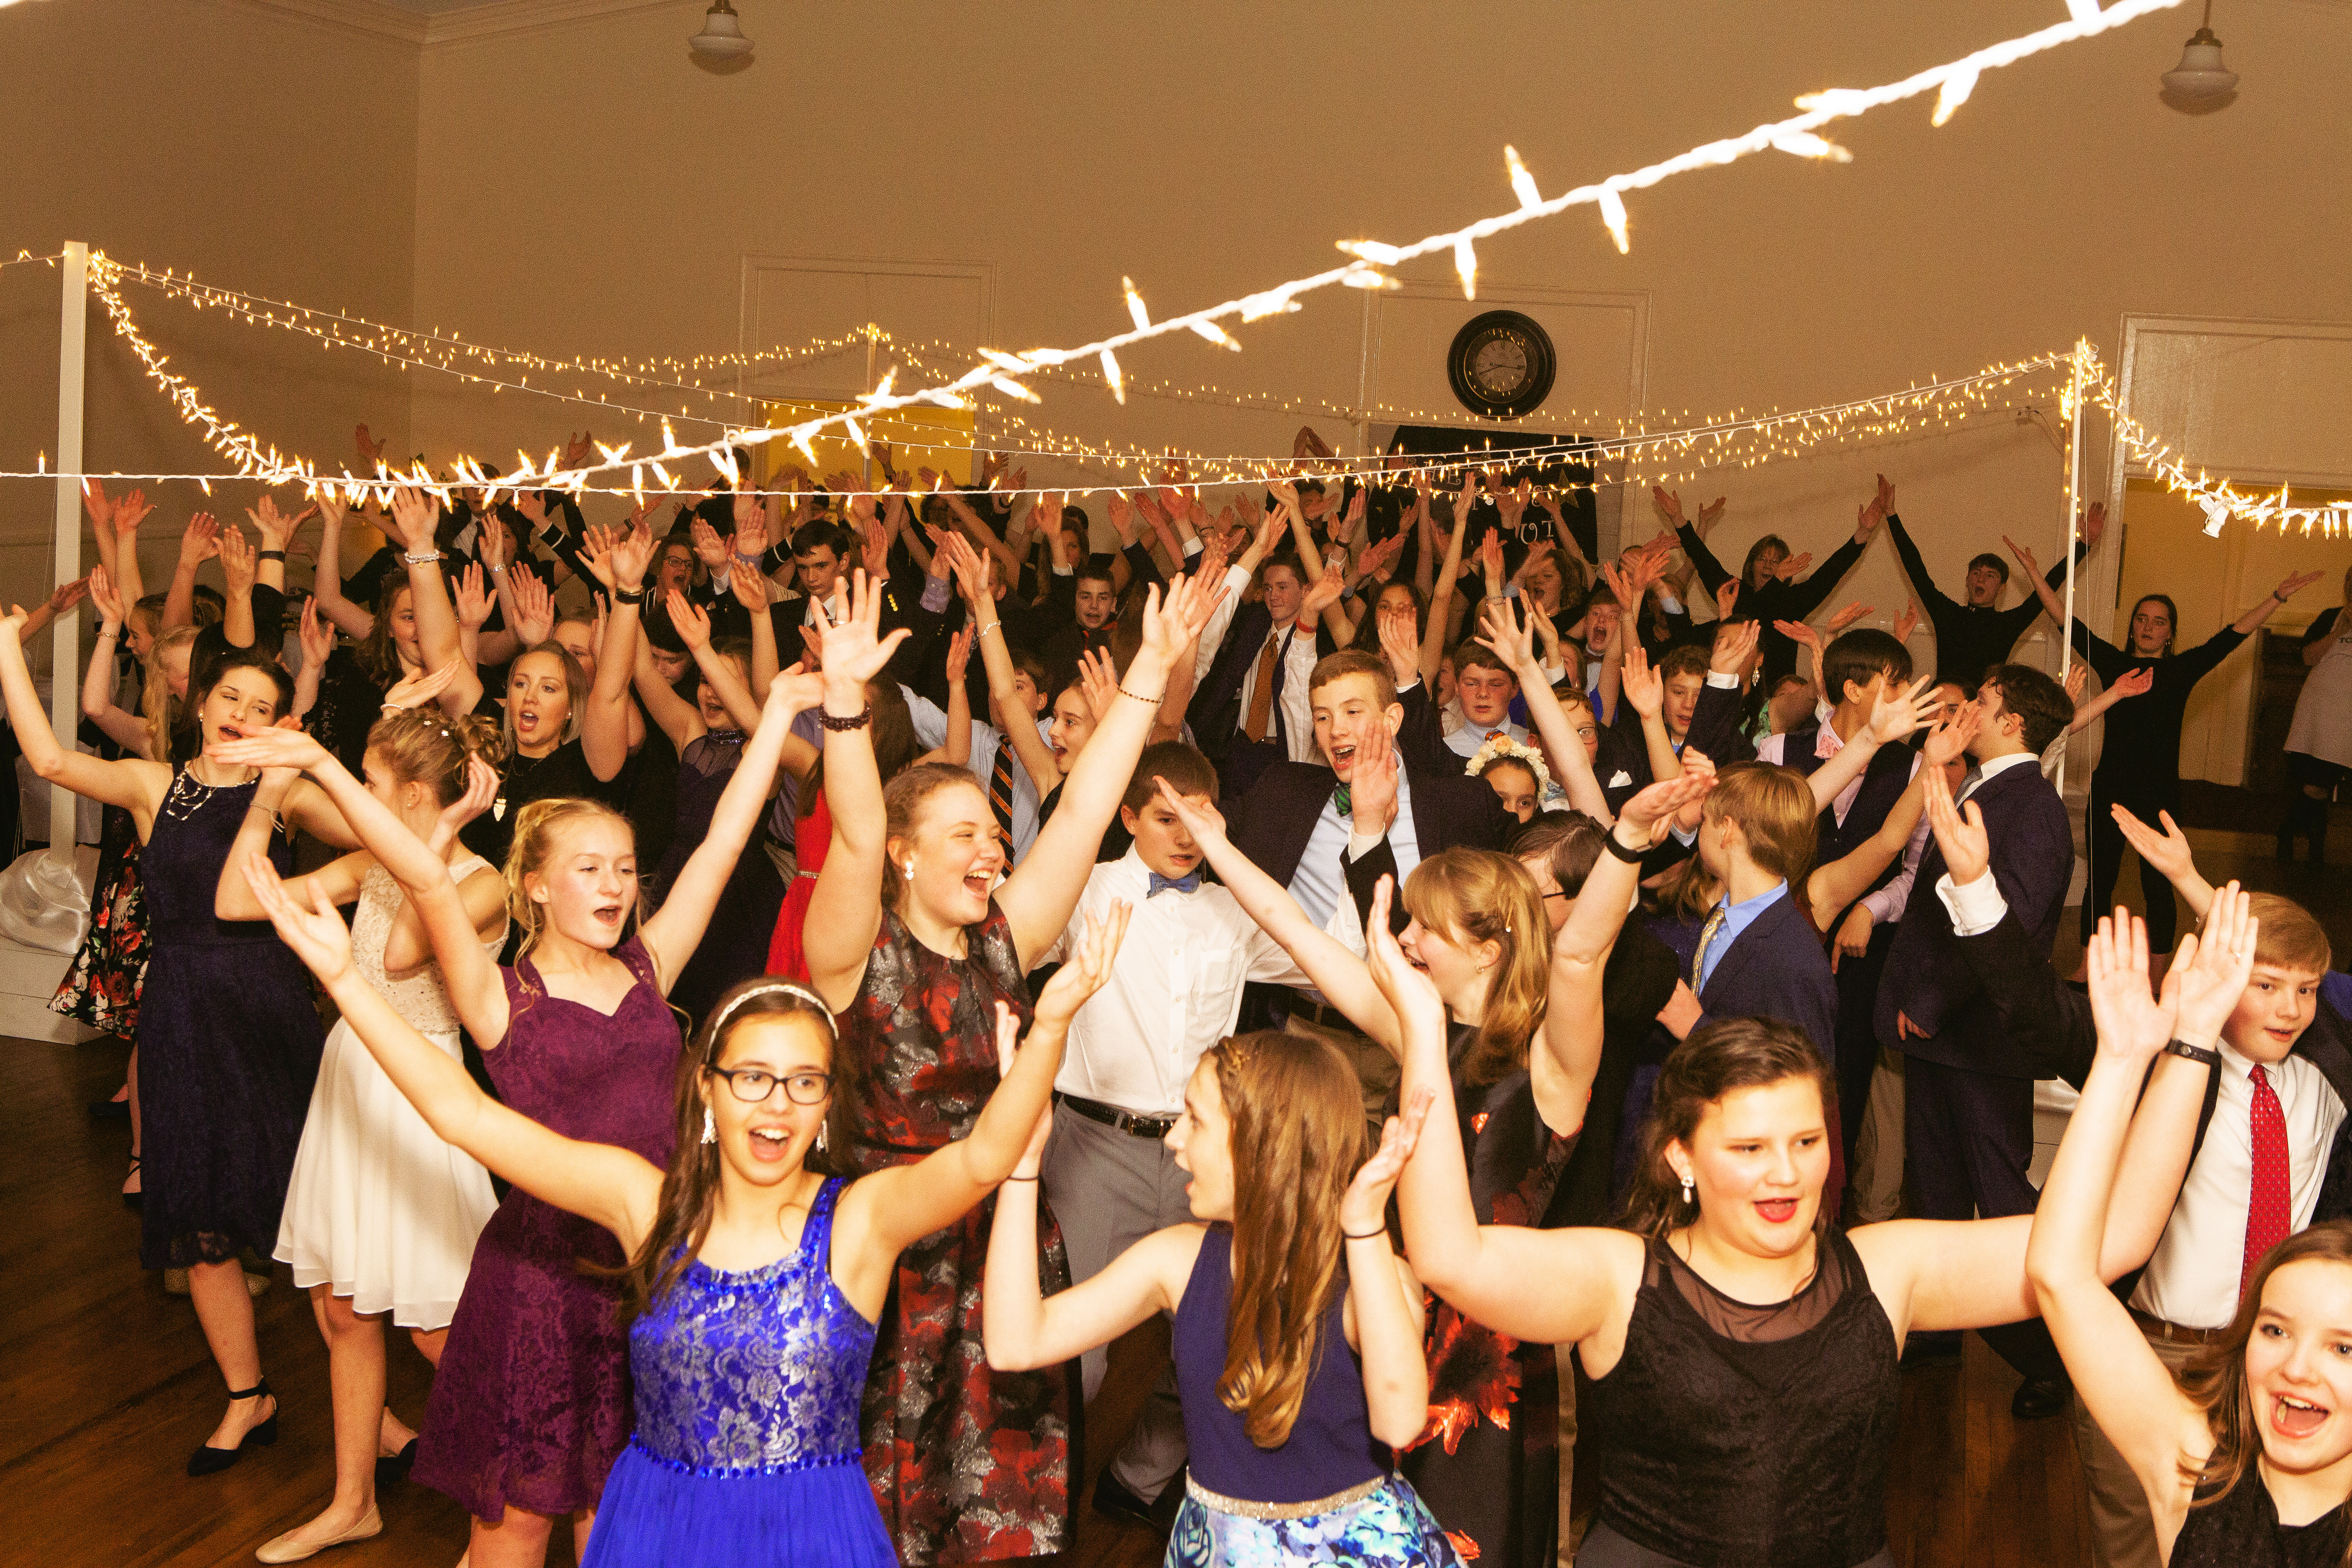 Trinity Christian School holds first cotillion Feb. 9, an evening full of fun and laughter for students